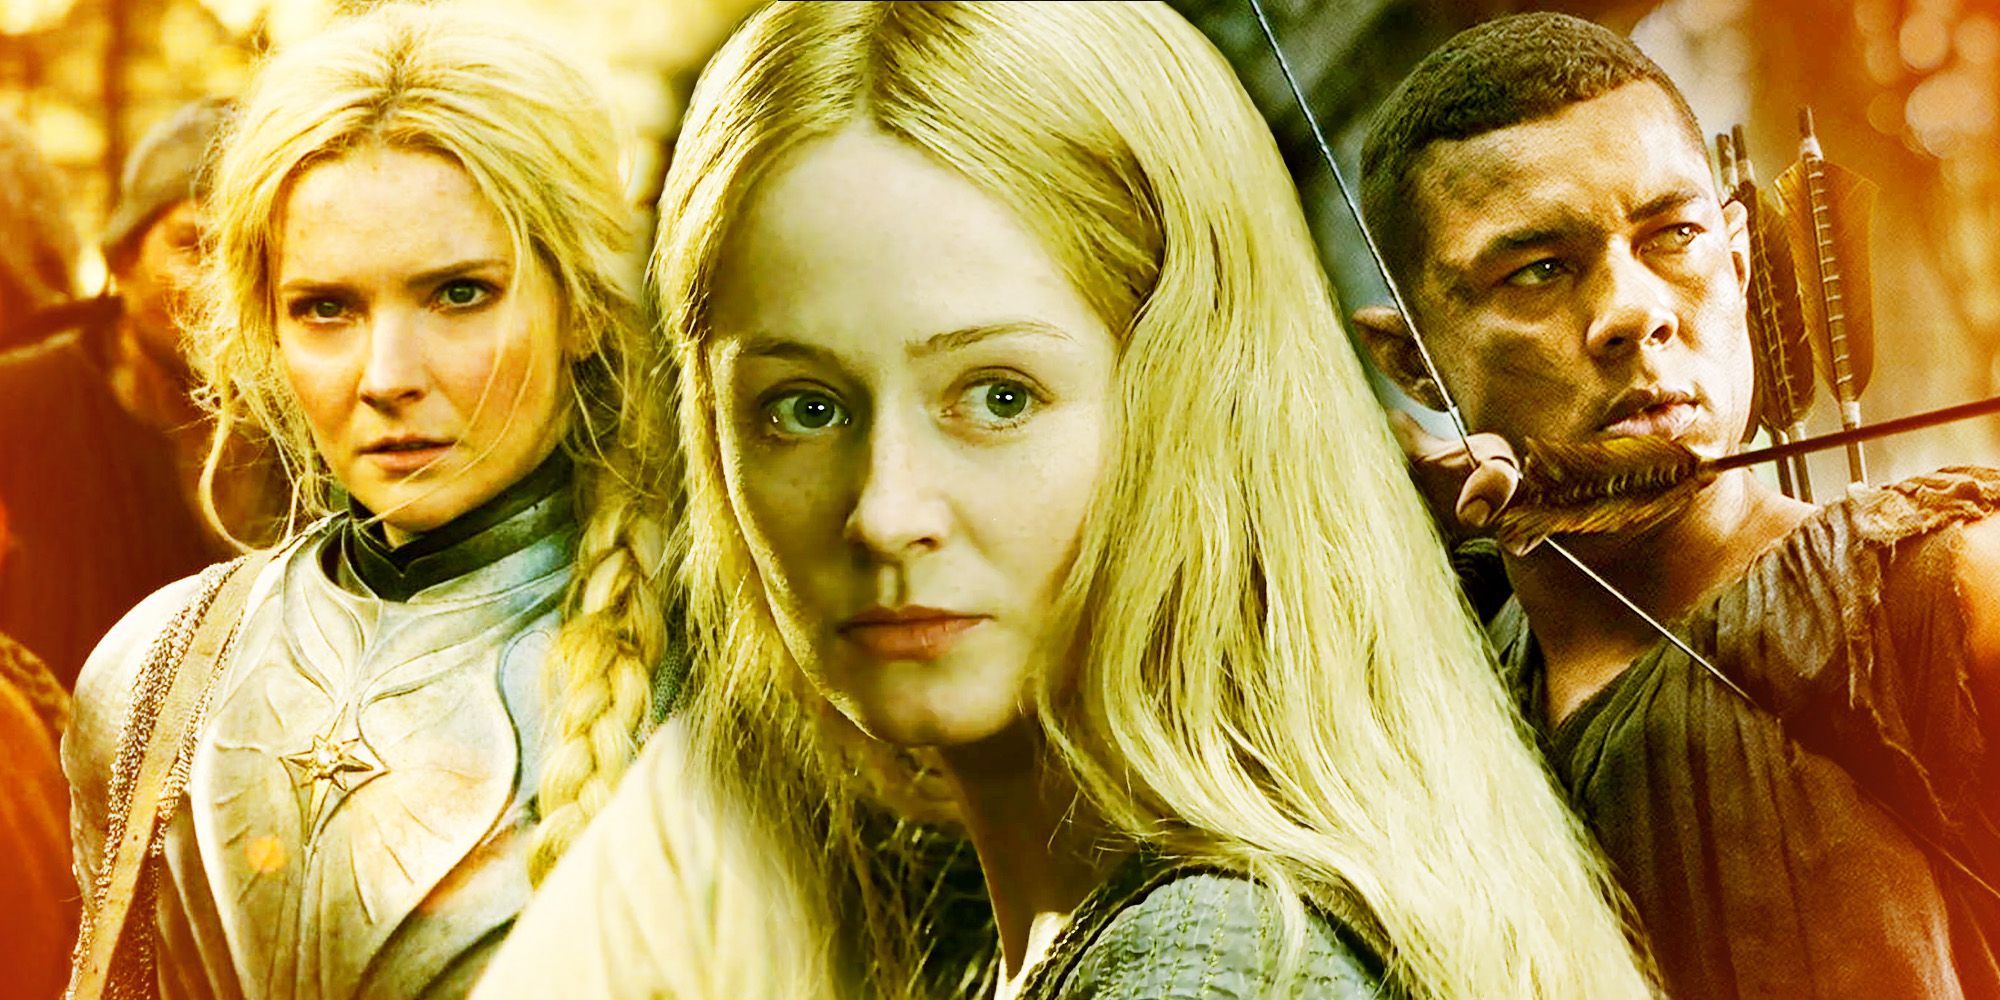 Eowyn from The Two Towers, Galadriel and Arondir from The Rings of Power